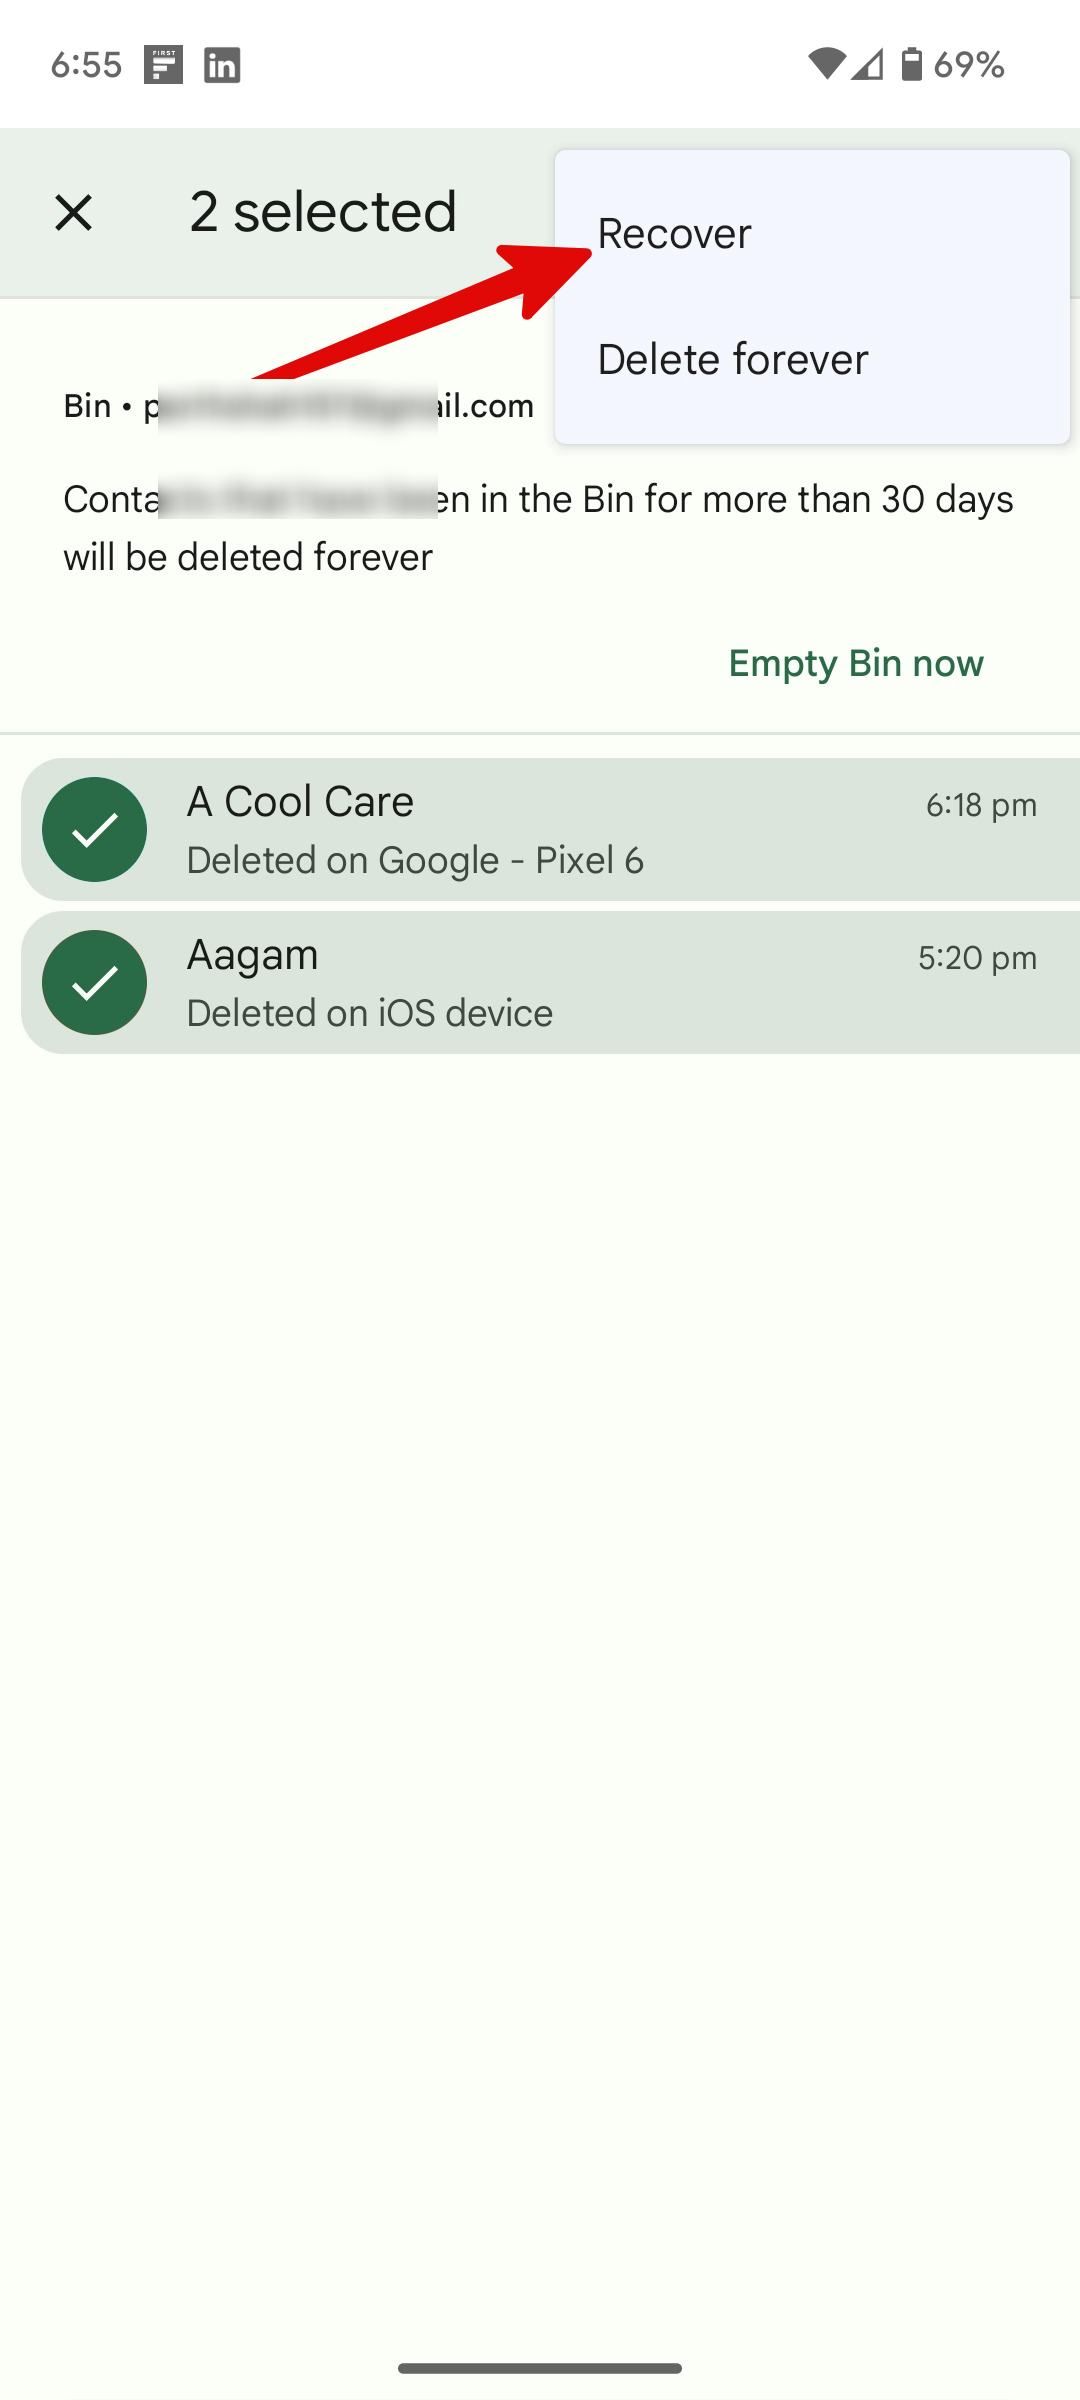 restore deleted contacts in Google